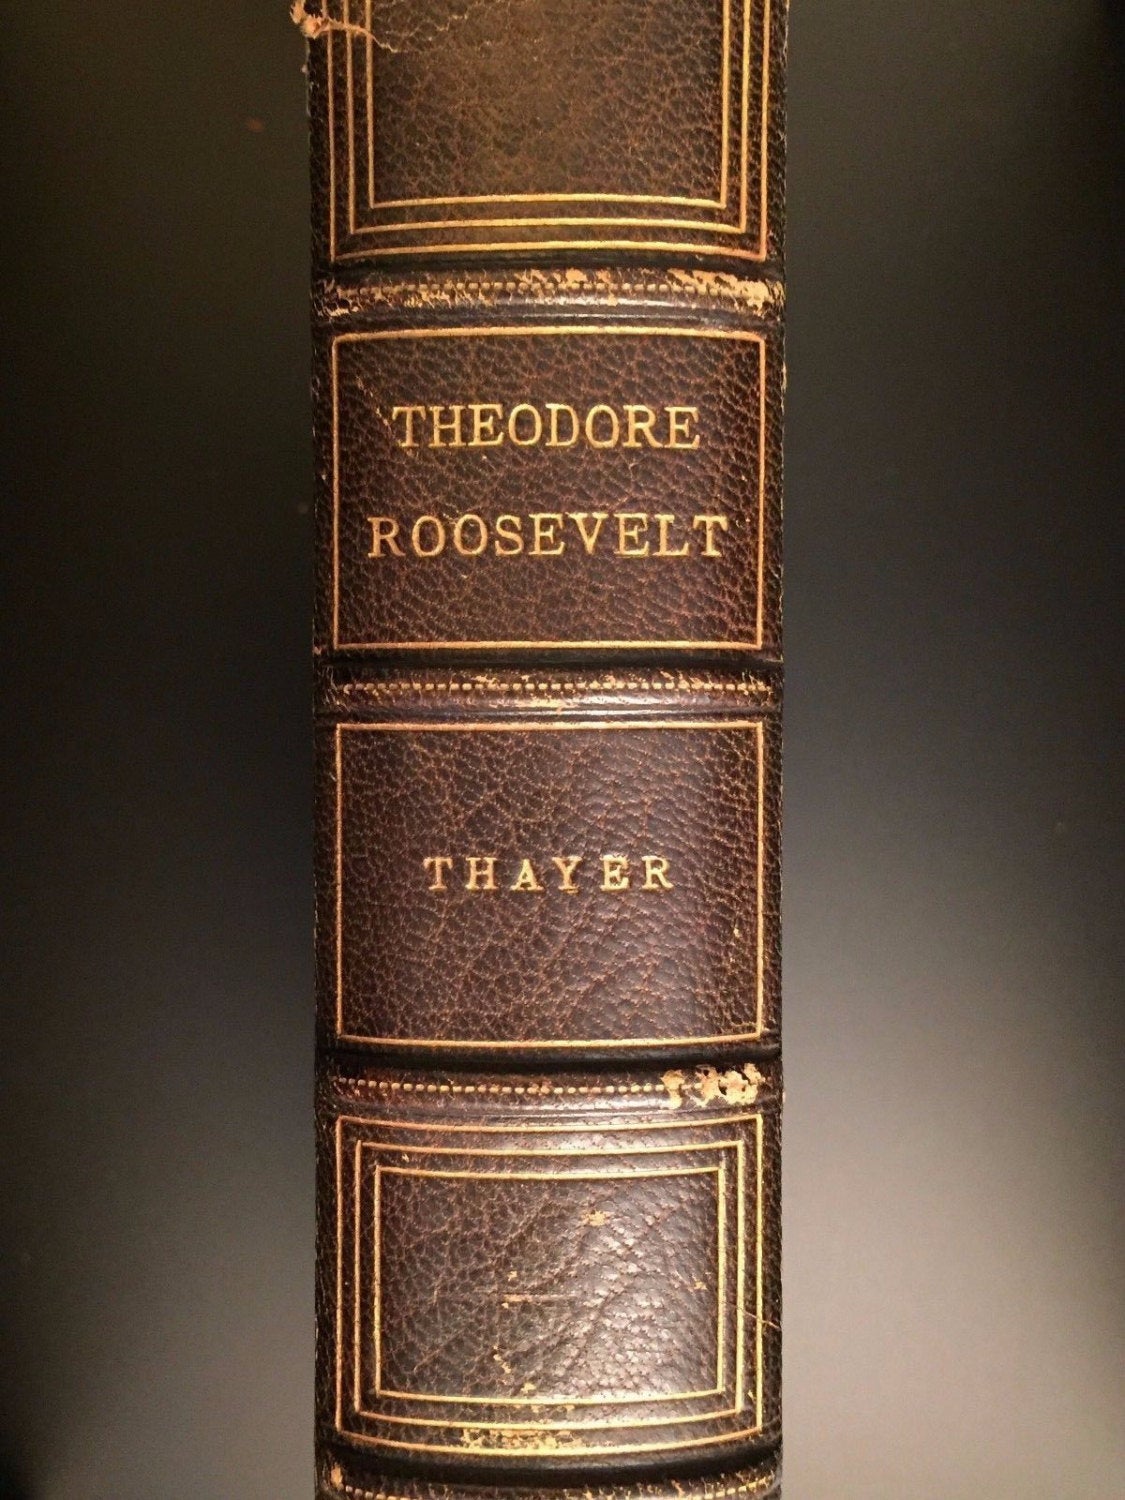 Theodore Roosevelt, An Intimate Biography, William Thayer, 1st Ed., 1919, Illustrated